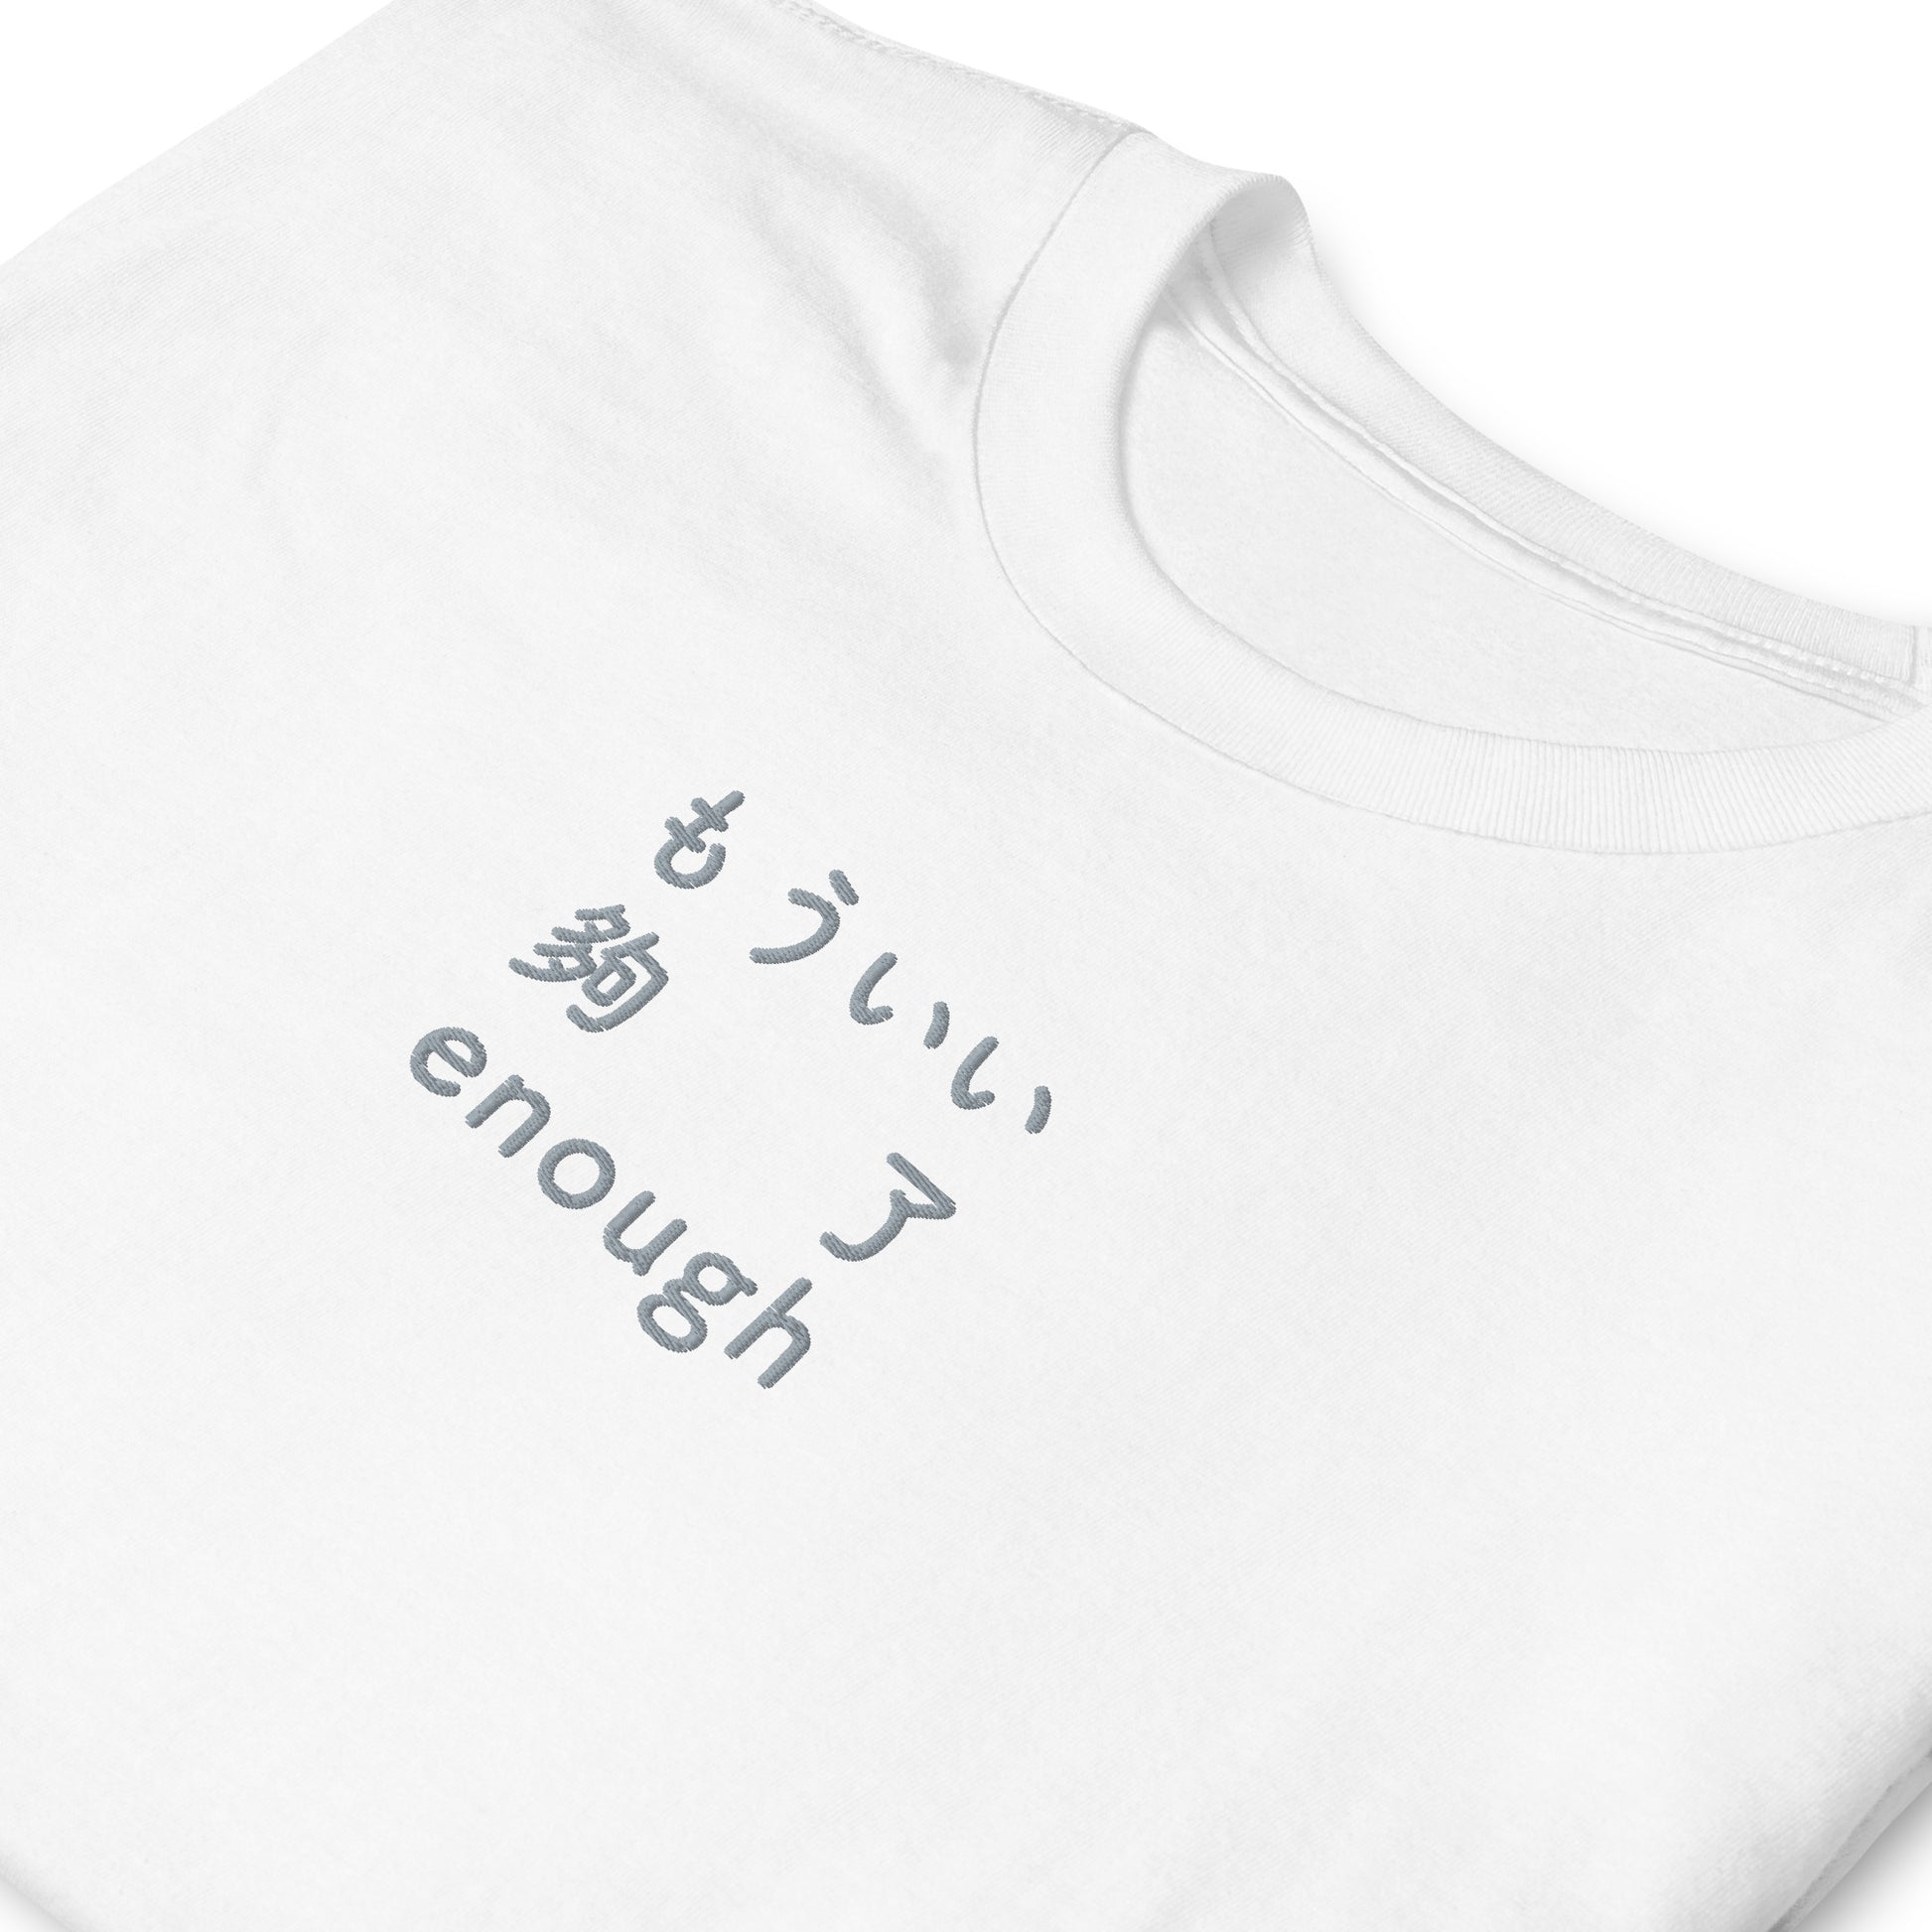 White High Quality Tee - Front Design with an light gray Embroidery "Enough" in Japanese,Chinese and English